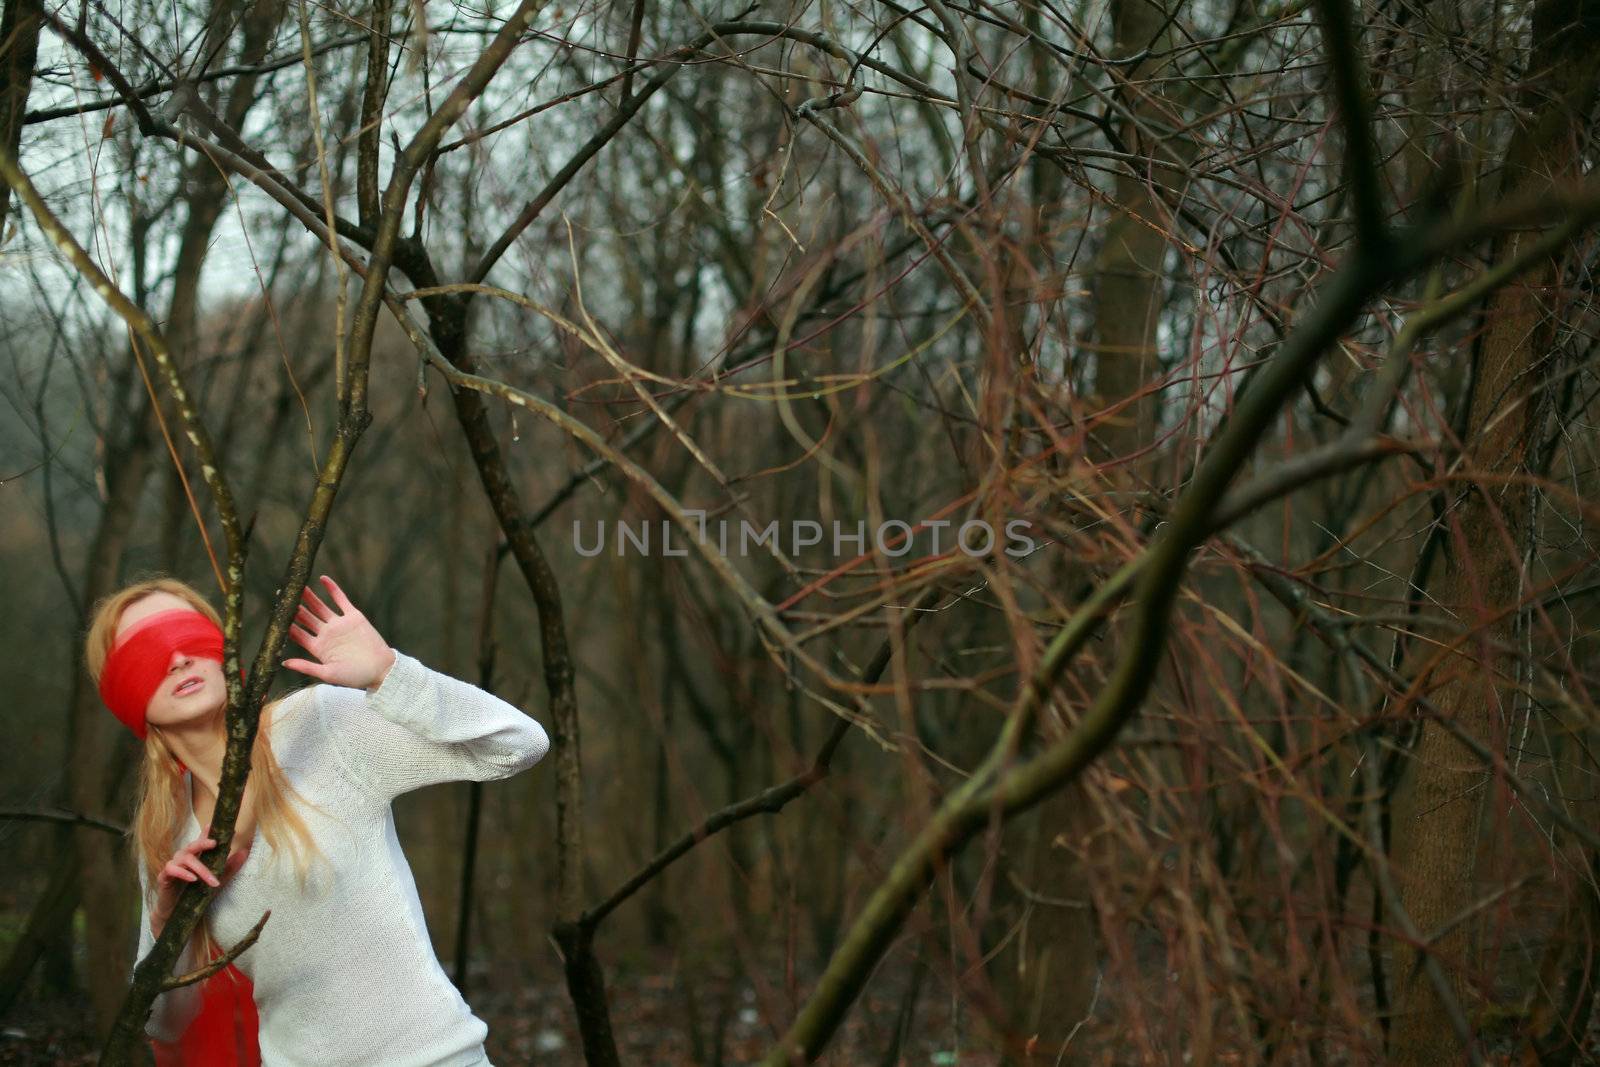 An image of blindfolded nice woman in dark forest